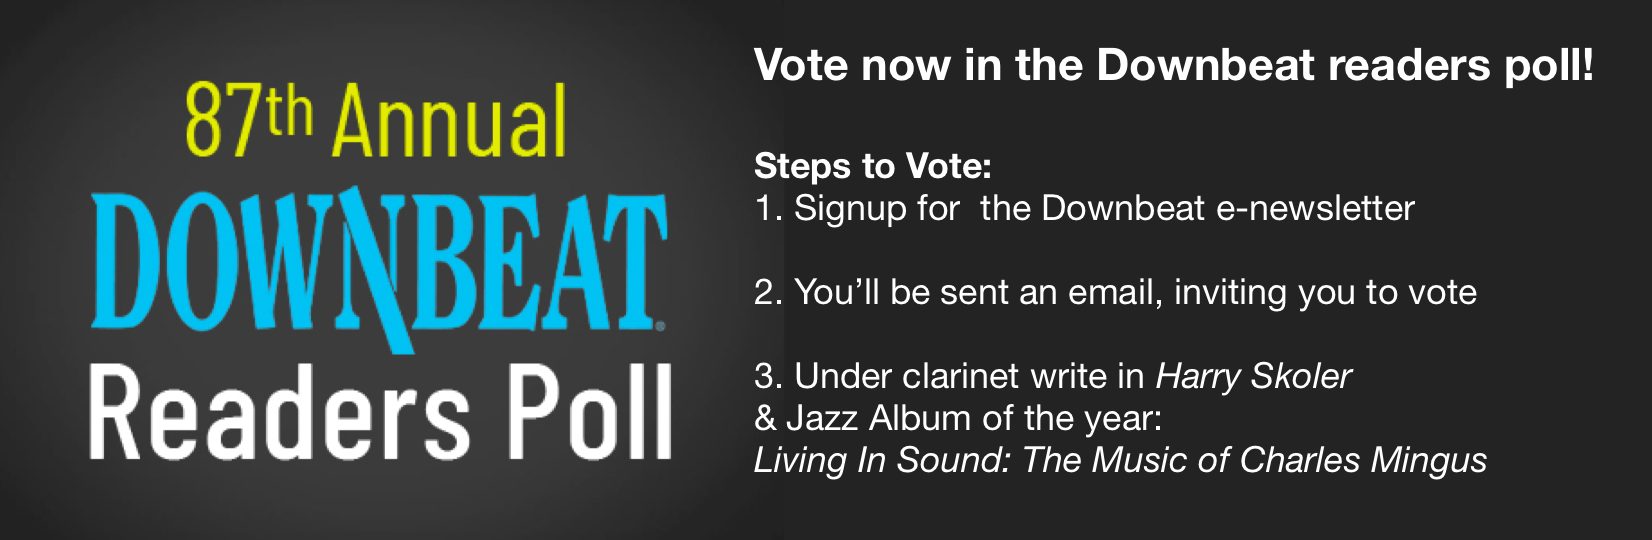 Vote now in the Downbeat Readers Poll